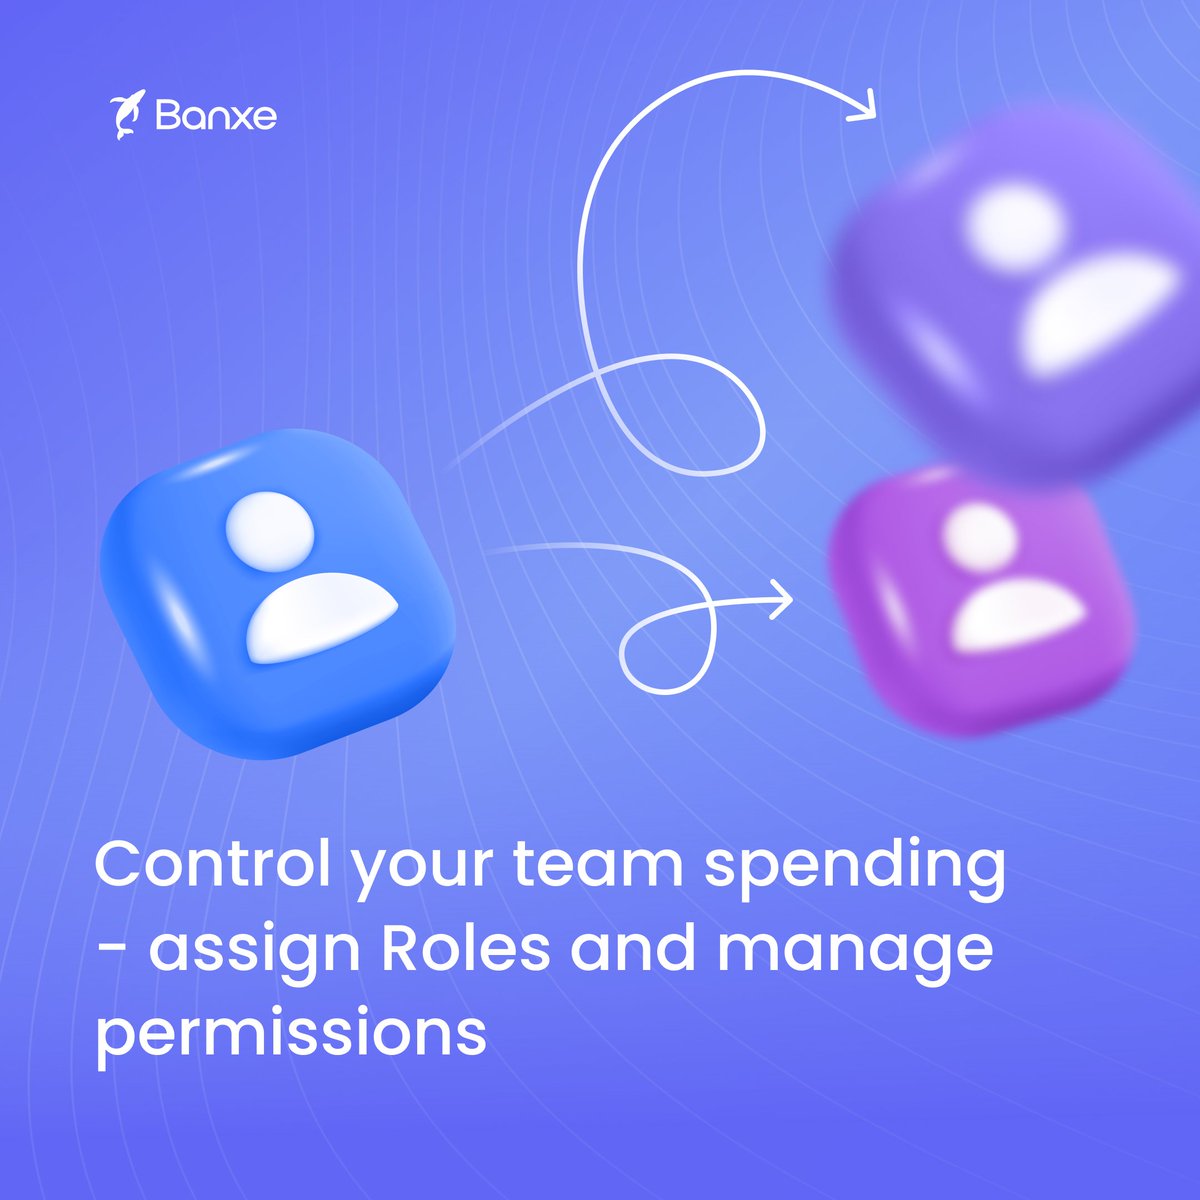 Manage team spending smarter! Assign Payment Roles & tailor permissions in your Business Account with Banxe. Say goodbye to generic permissions. Create, customize, & control access for efficient, secure teamwork now! #Banxe #PaymentRoles #TeamManagement